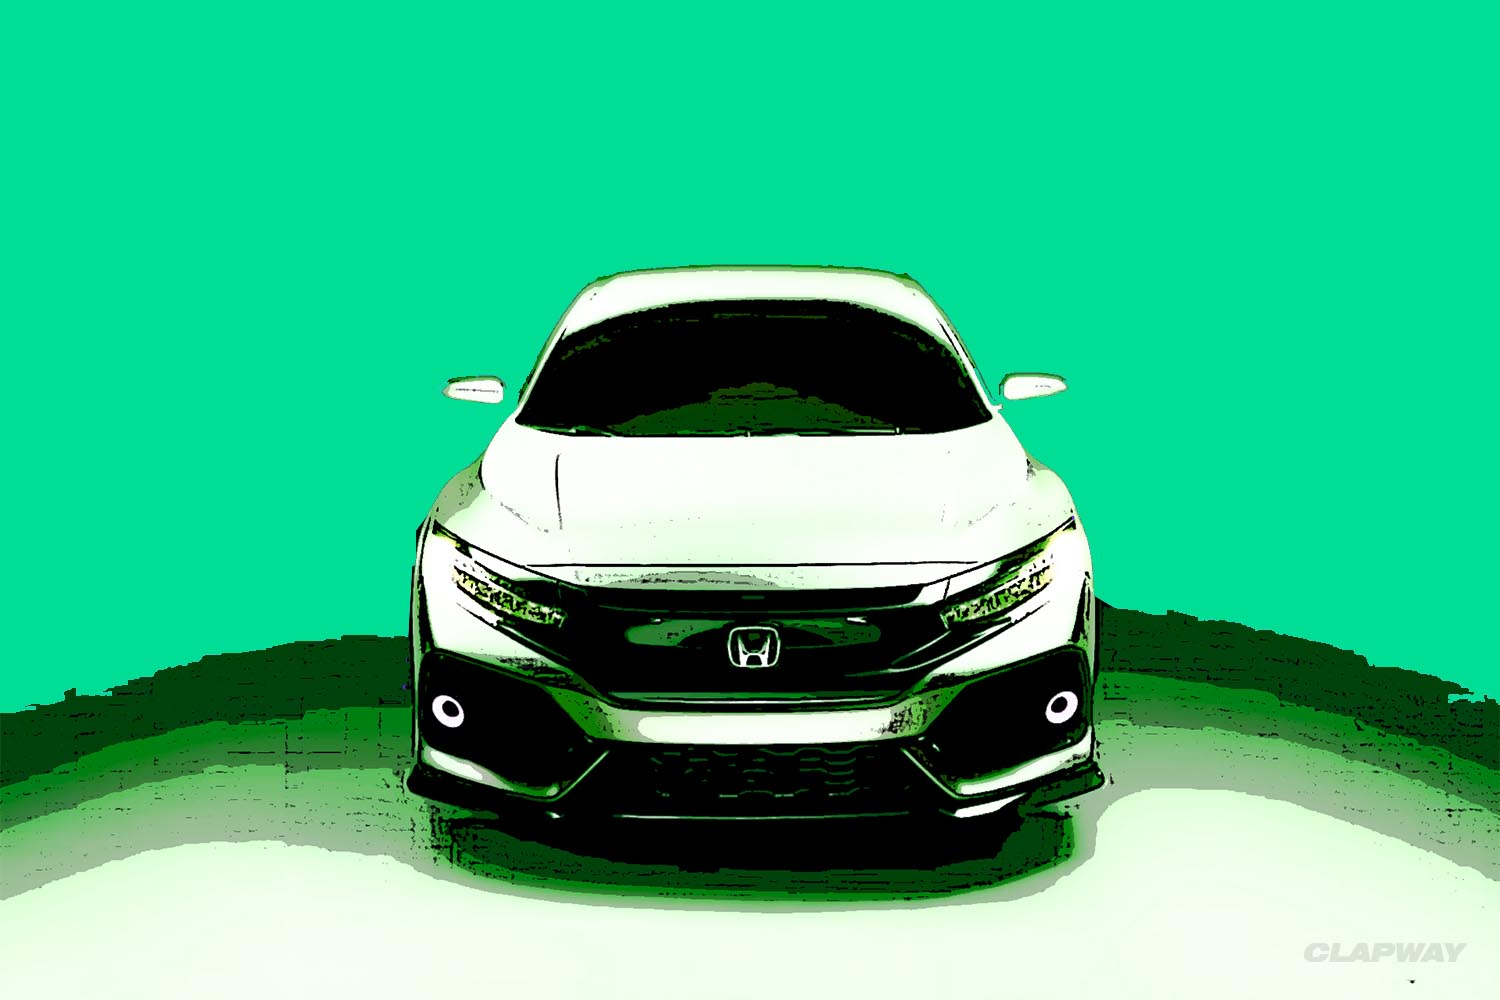 Top 3 Accessories of the Honda Civic That You Need Clapway